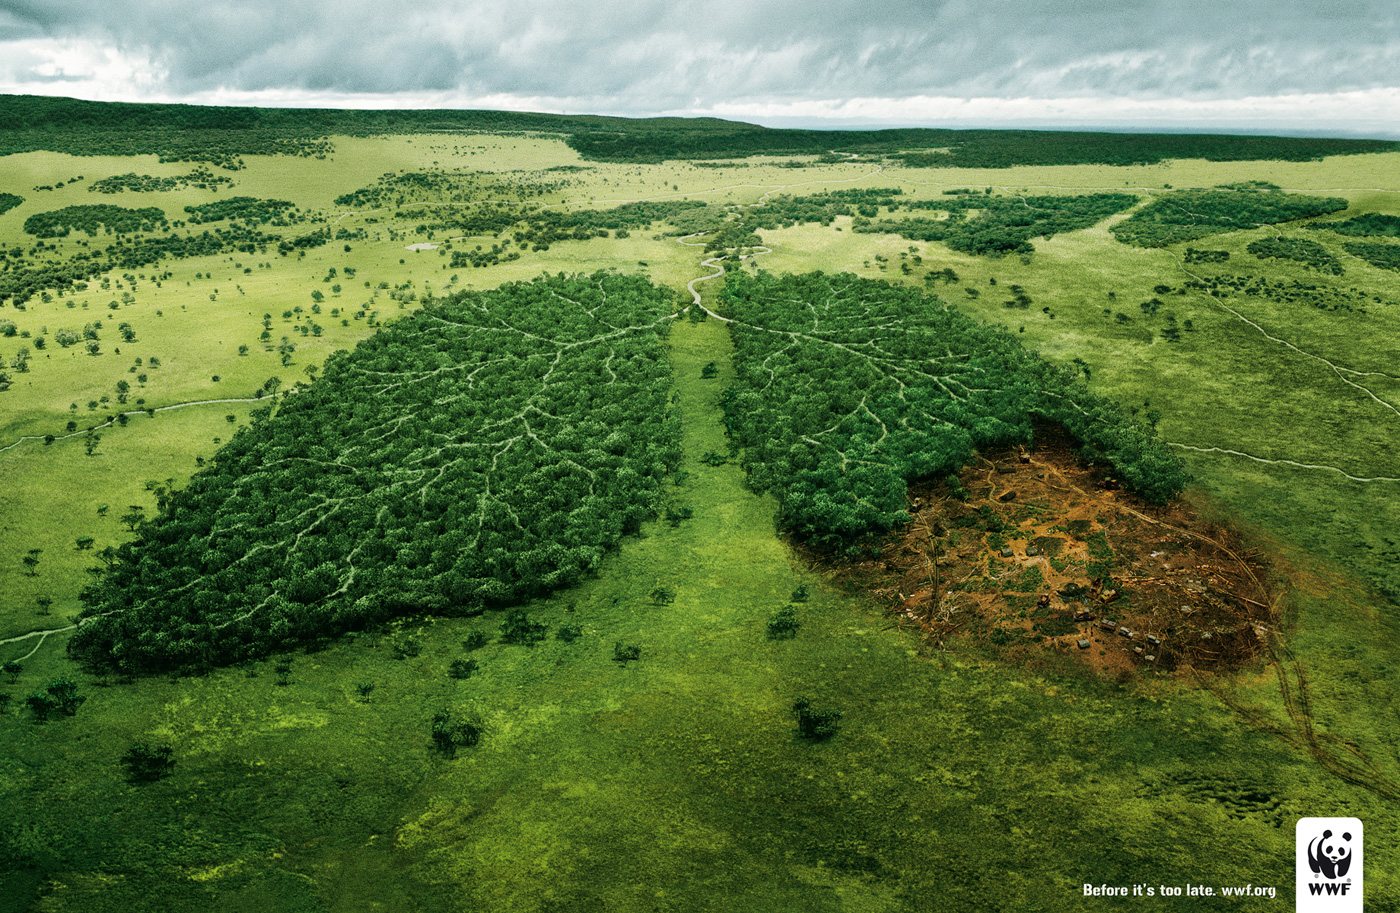 wwf_berfore-it-is-too-late